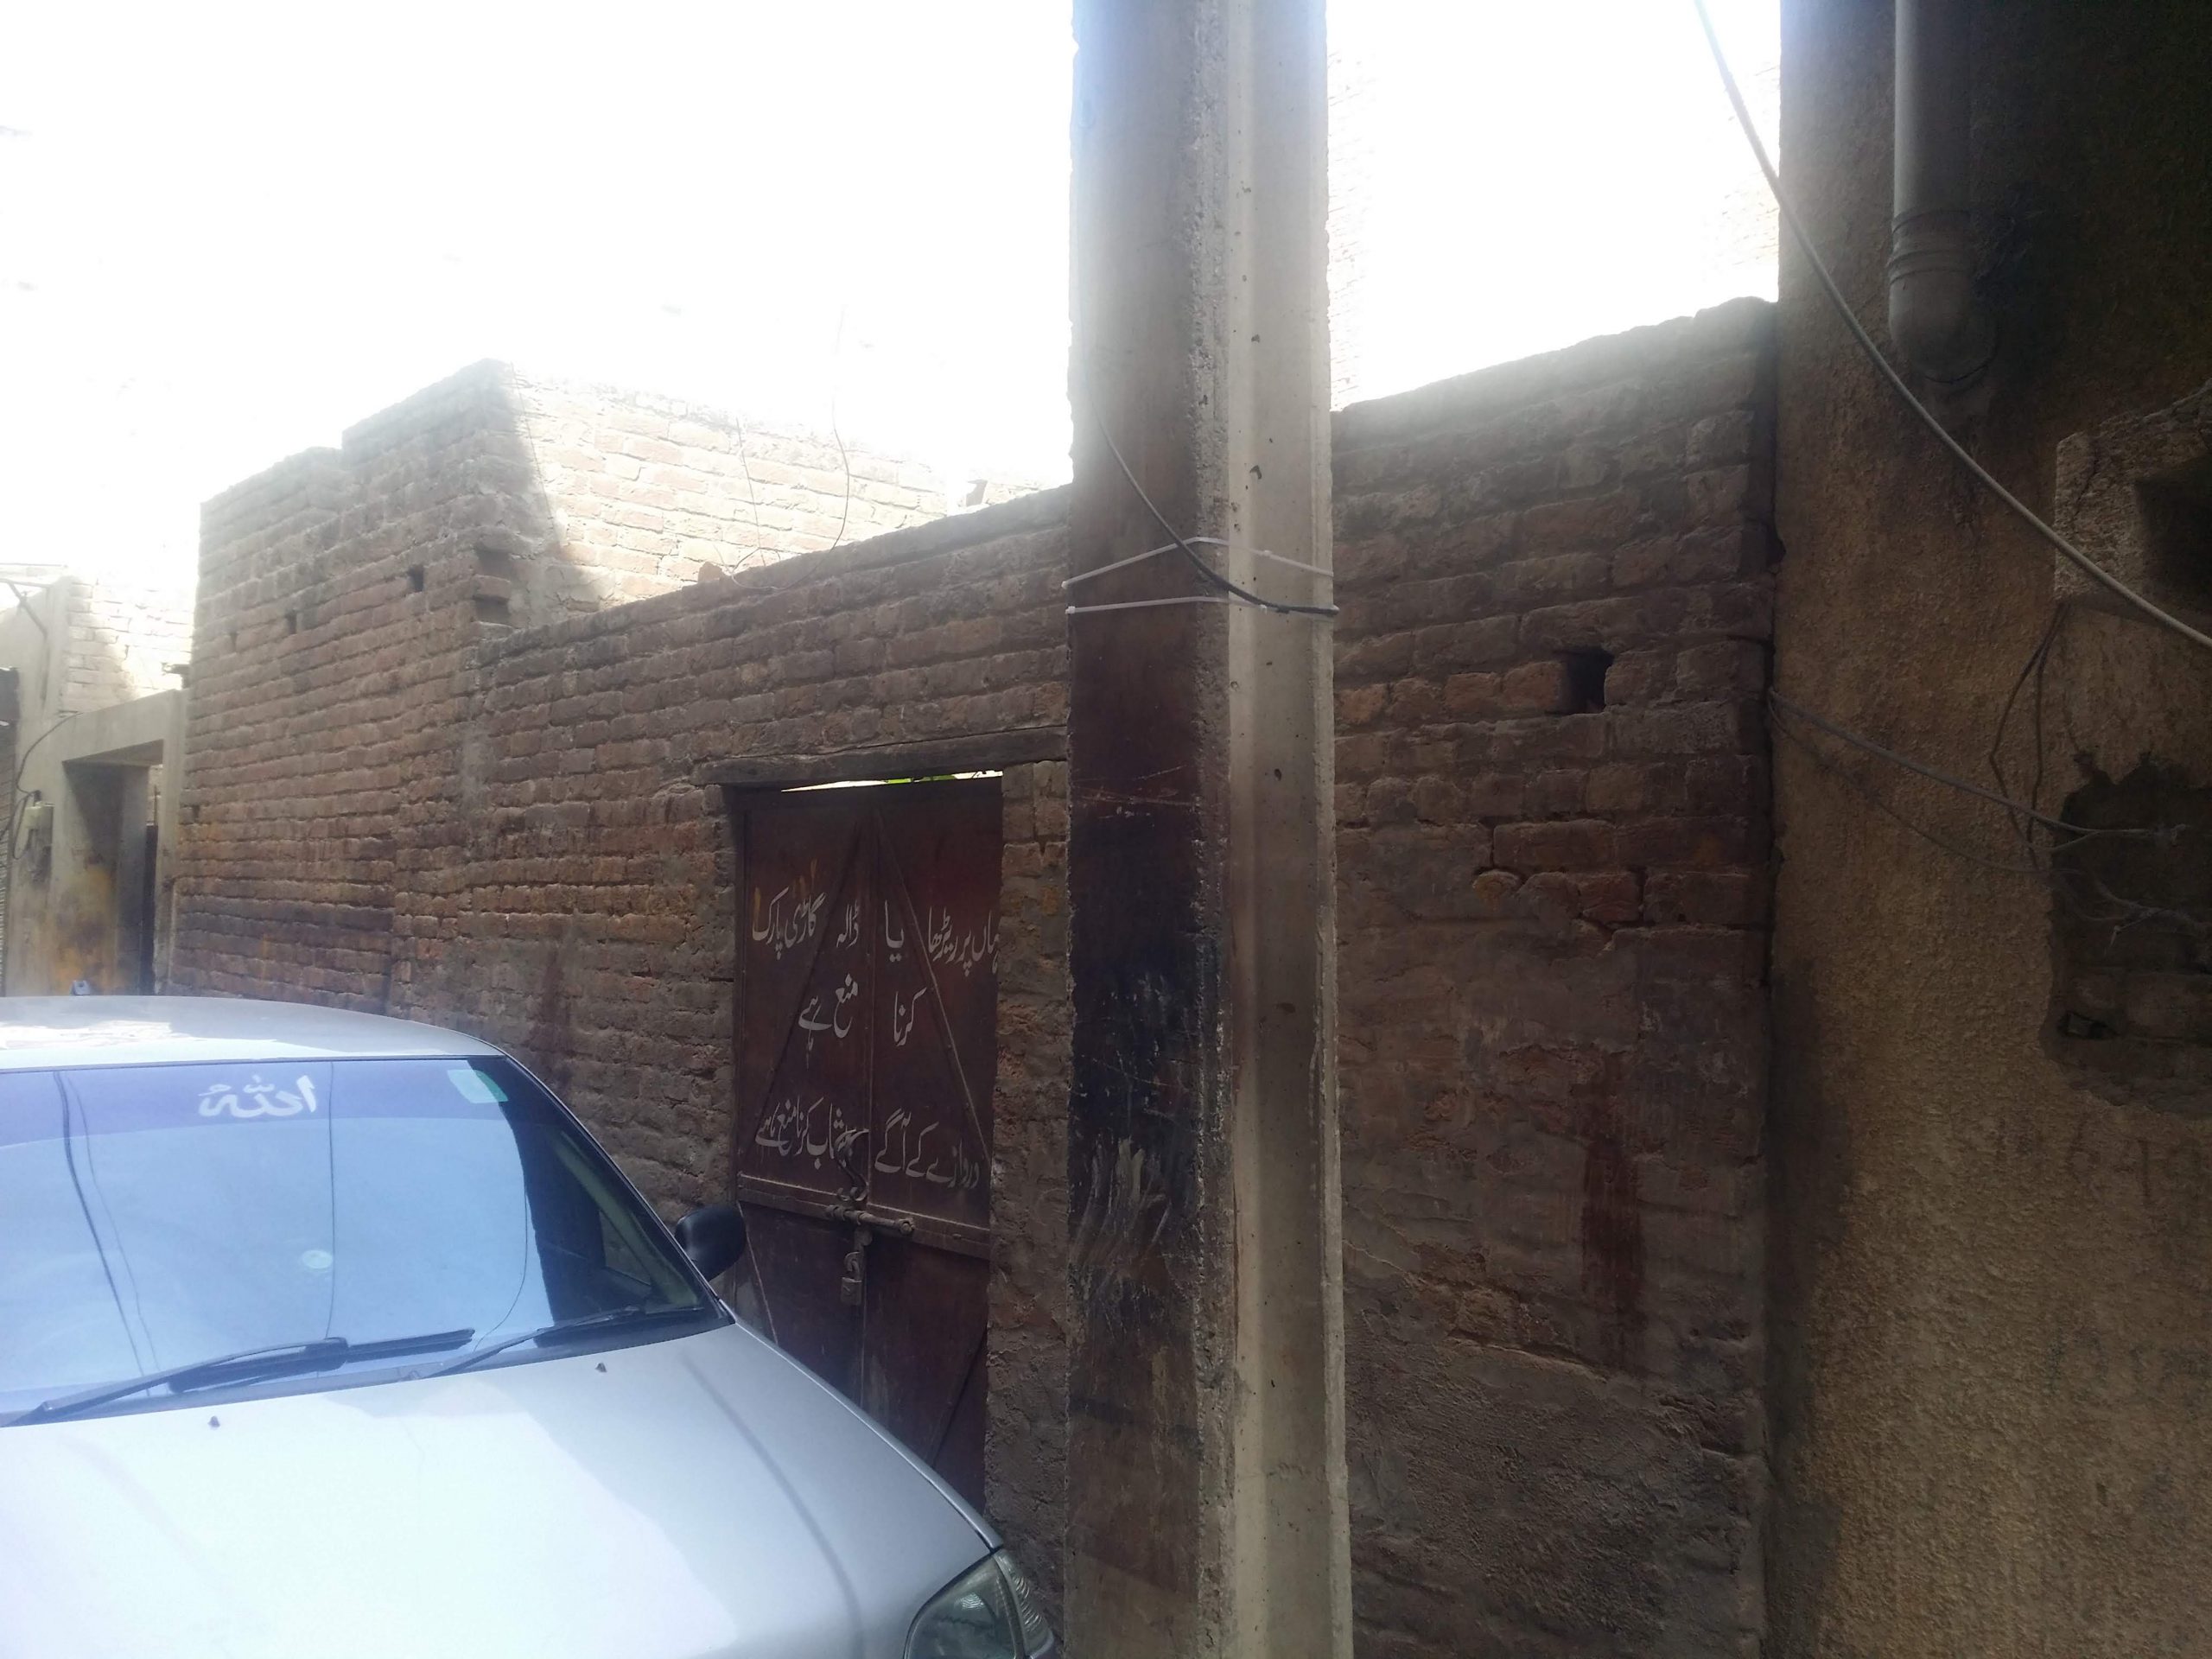 5.5 Marla plot in commercial area of Furniture market Gujrat for sale